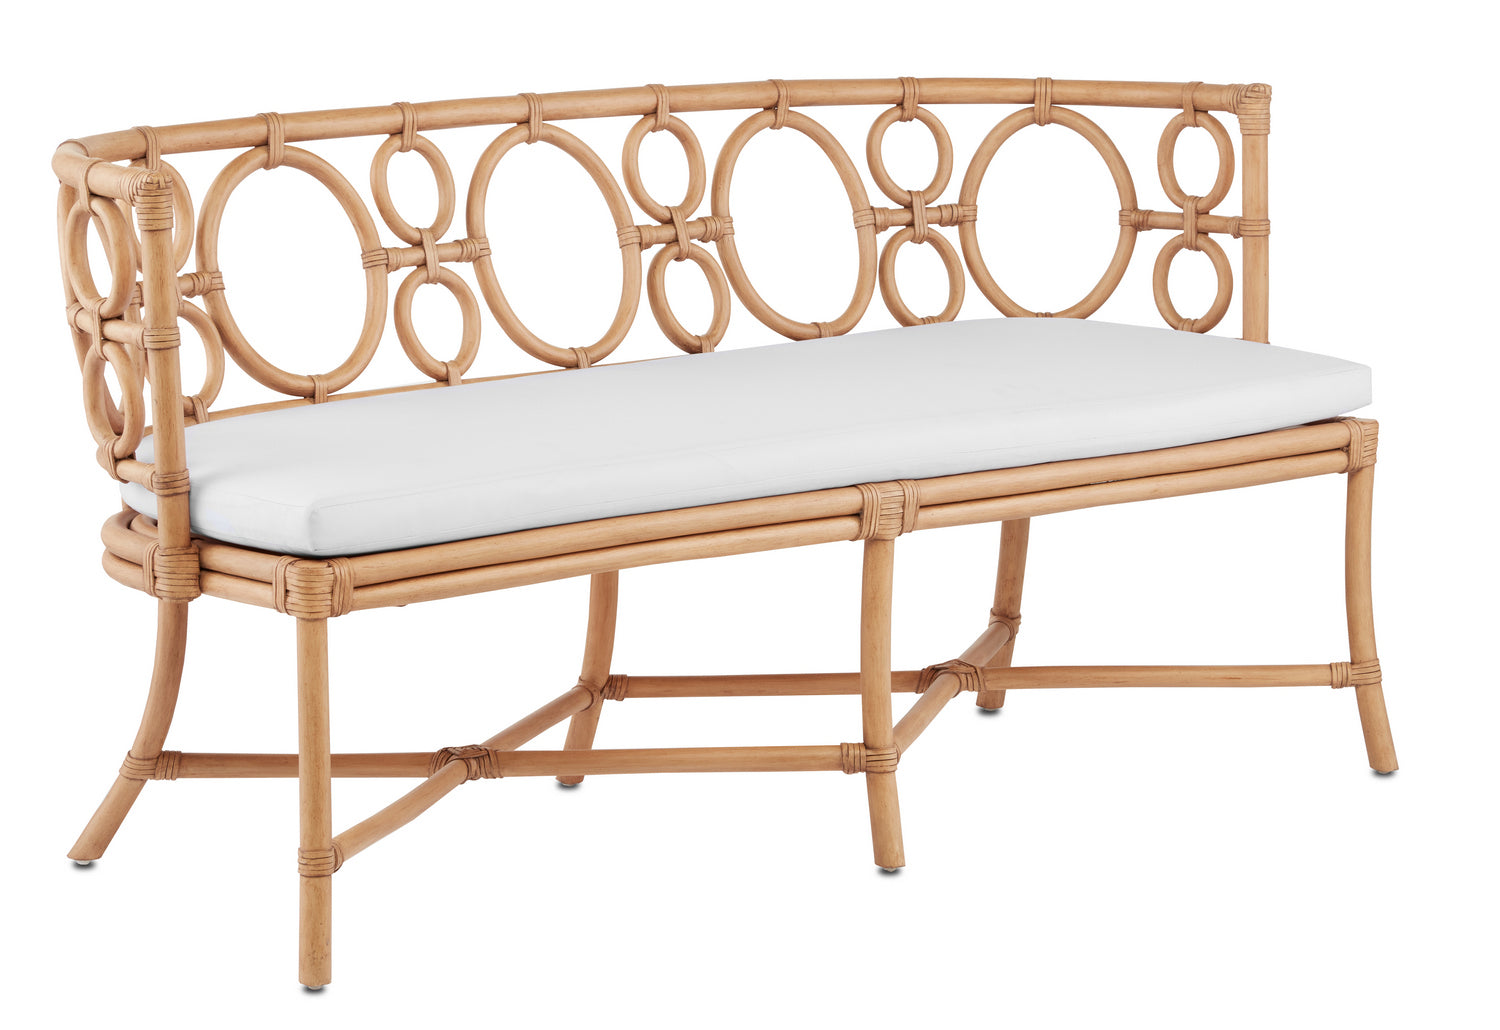 Bench from the Tegal collection in Rattan/Natural finish